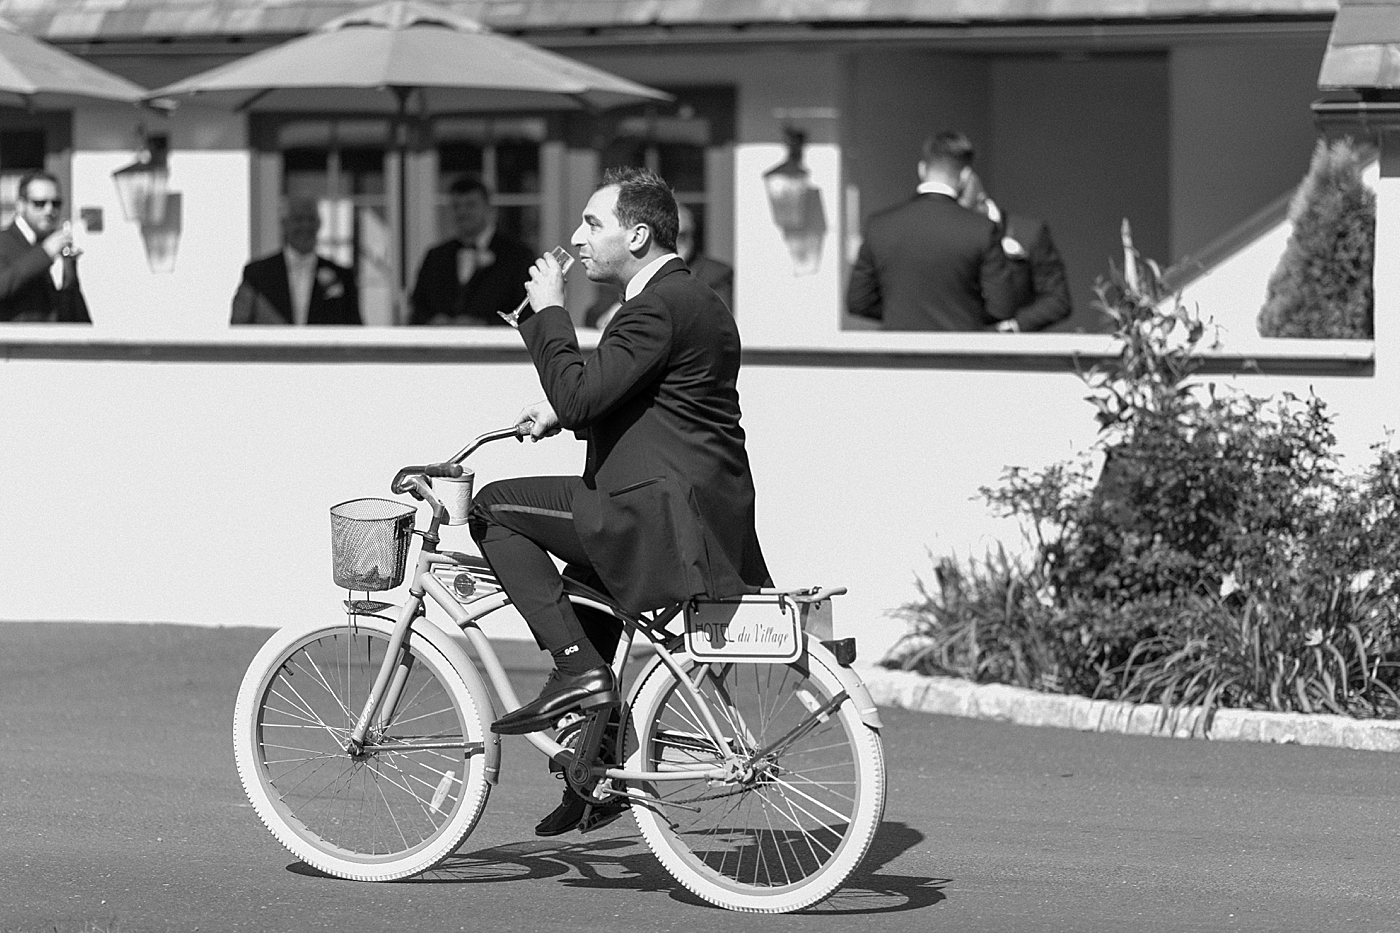 Wedding guest drinking wine ridding a bike during Hotel du Village Wedding | Image by Hope Helmuth Photography